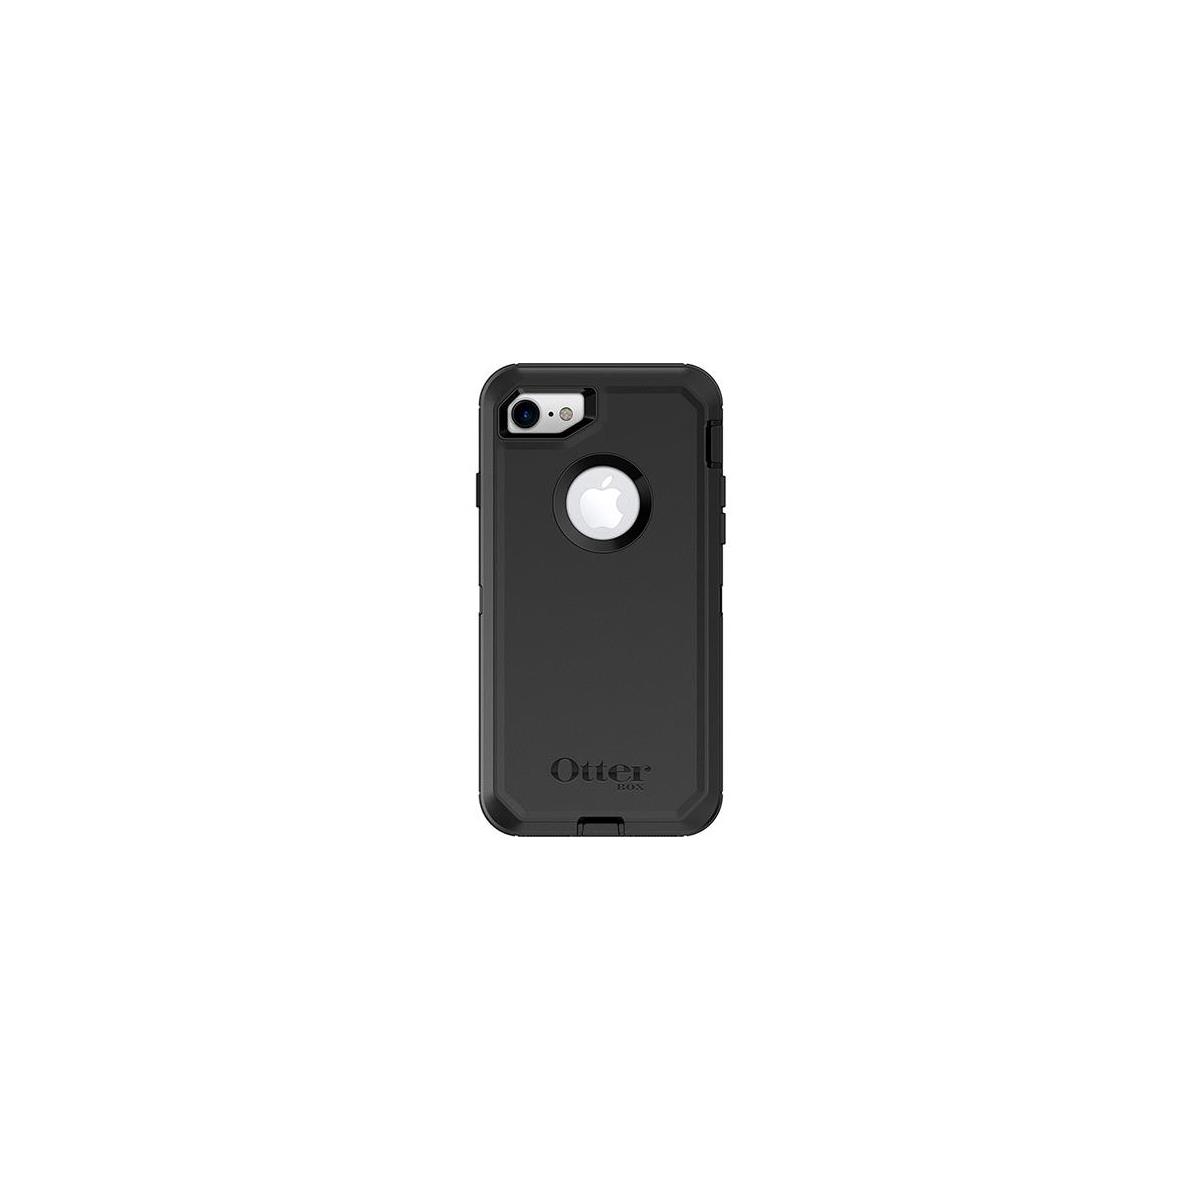 Photos - Case OtterBox Defender  for iPhone 7/ iPhone 8 - Black 77-56603 